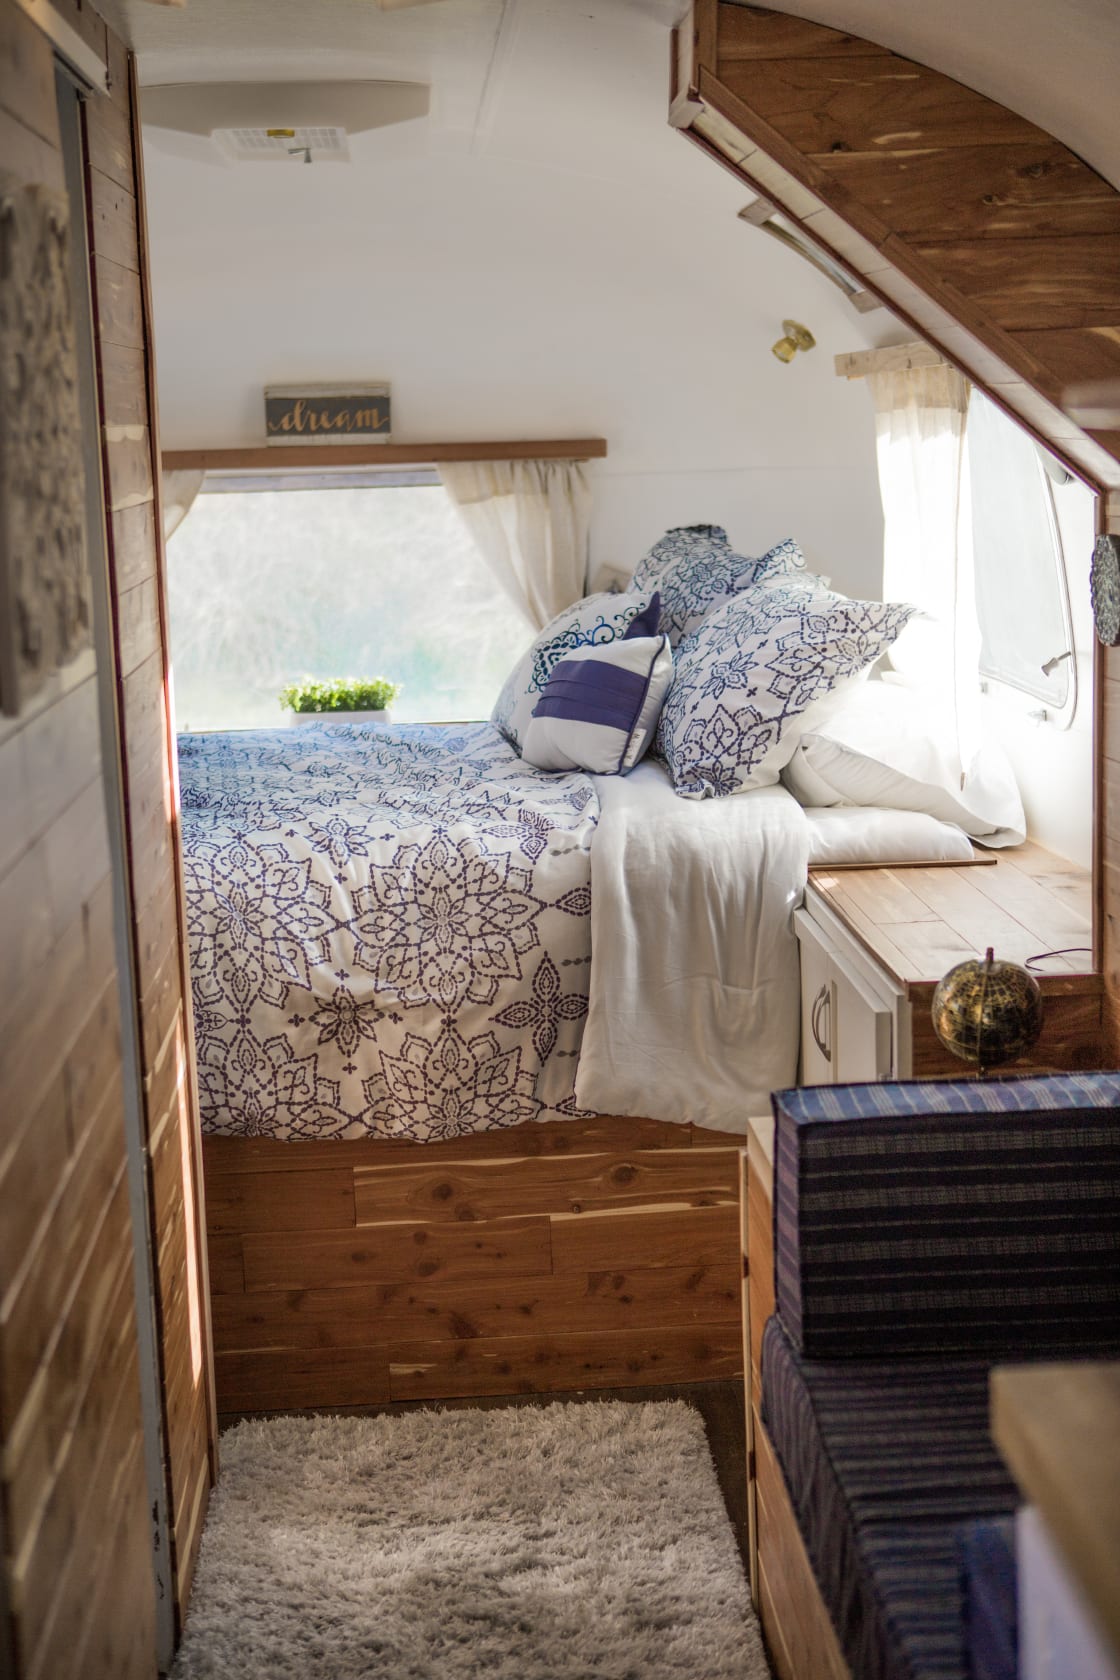 The bed in the back of the airstream, very cozy and cute!